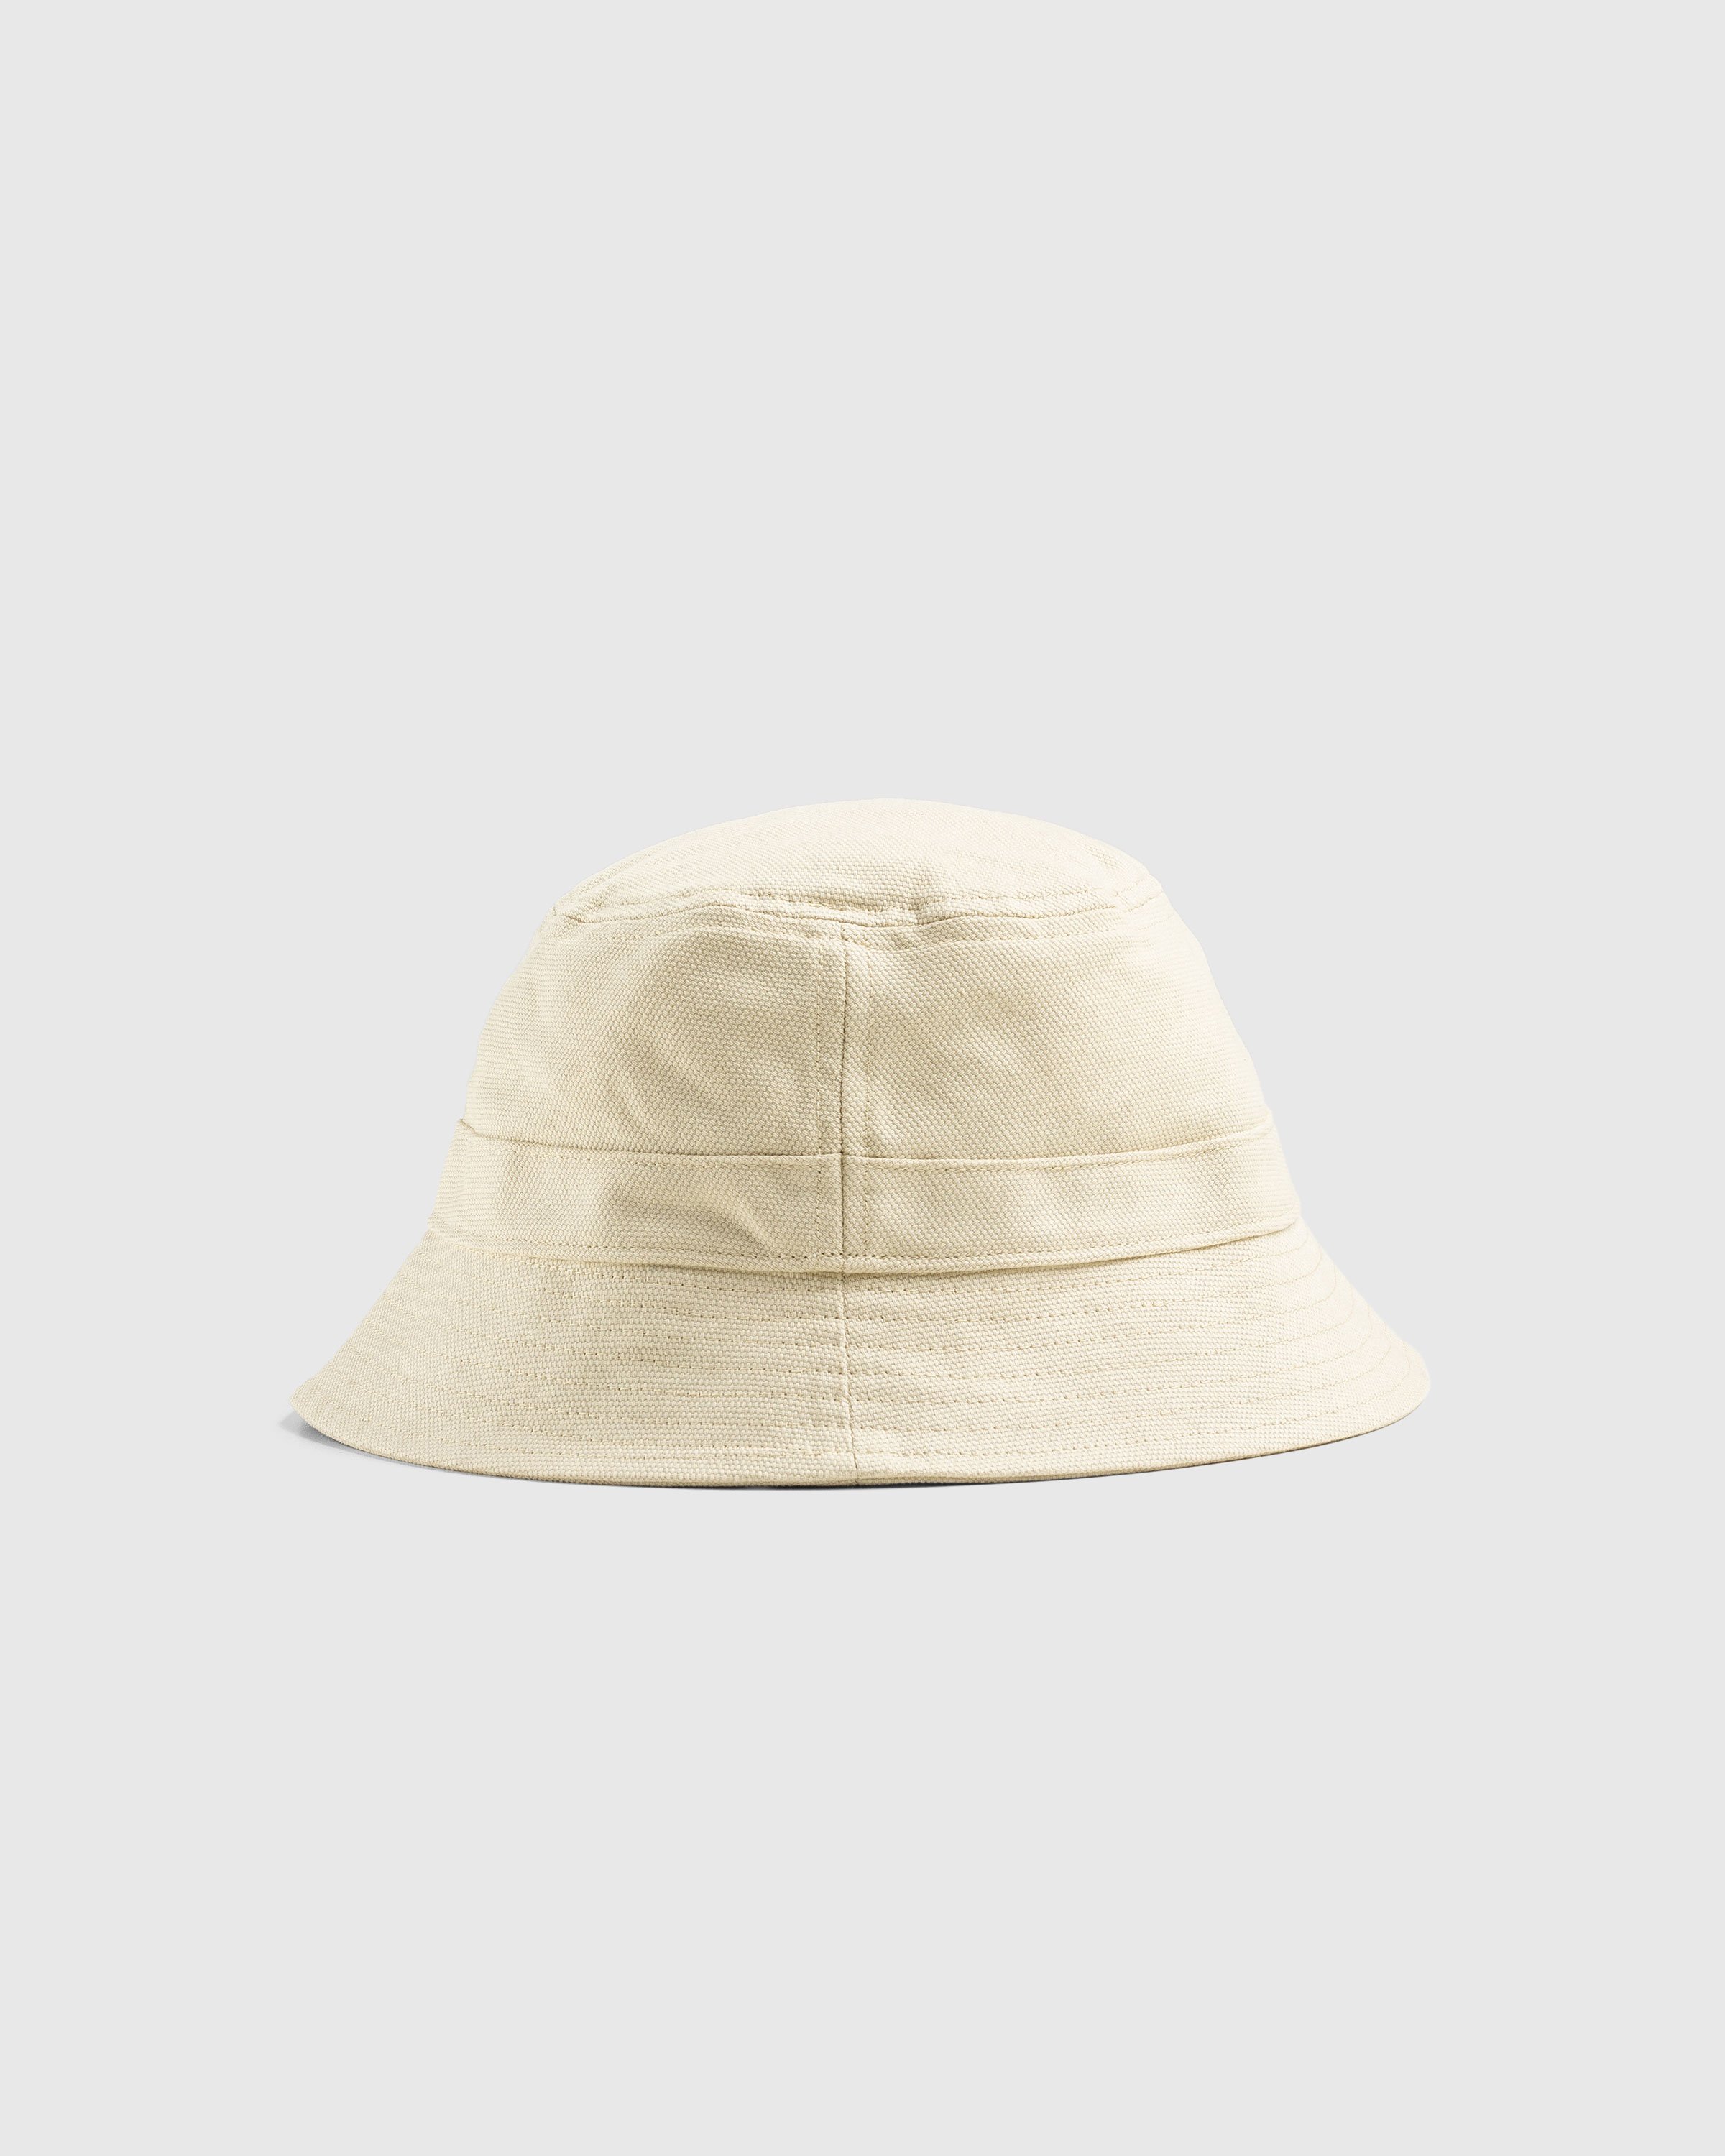 The North Face - Mountain Bucket Hat Gravel - Accessories - Beige - Image 2